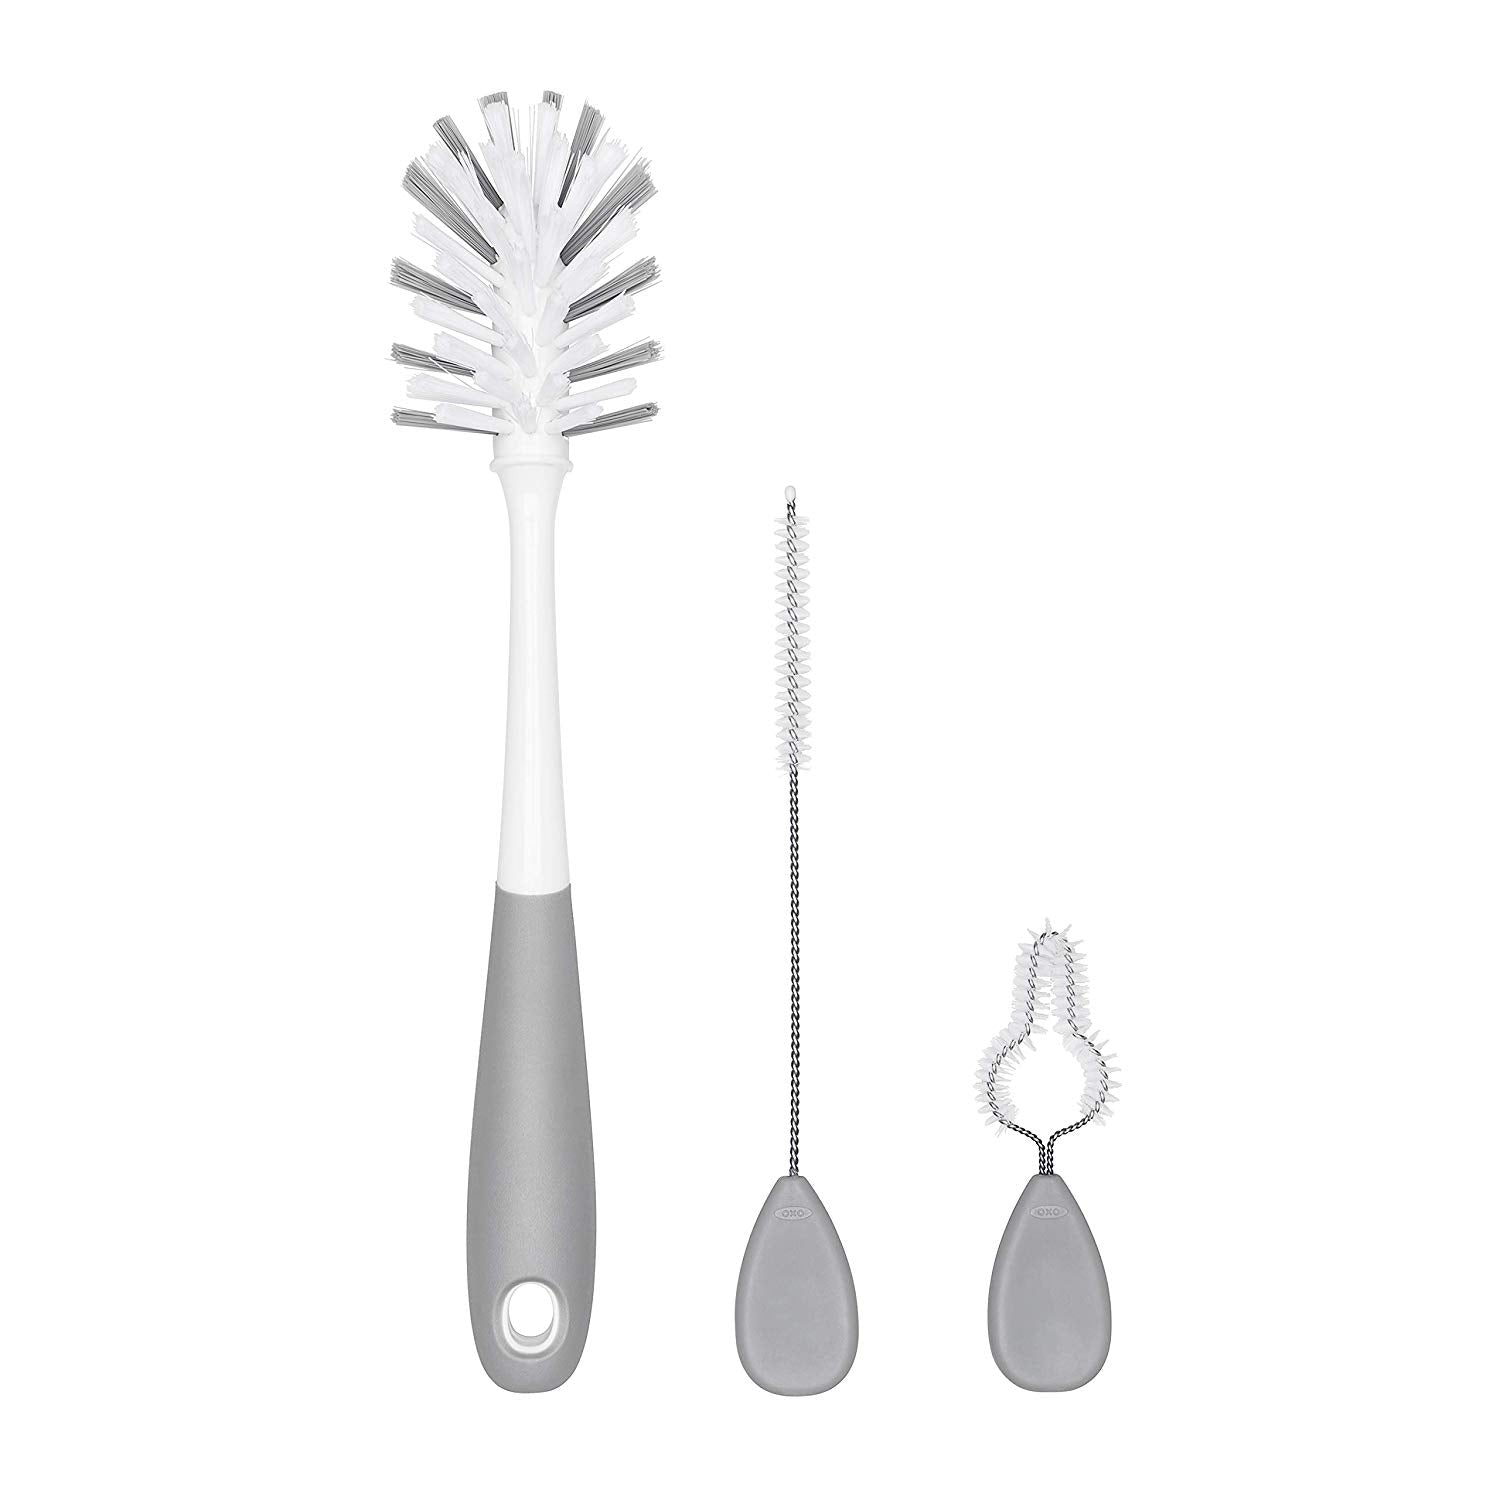 Oxo Tot Water Bottle & Straw Cup Cleaning Set - Grey